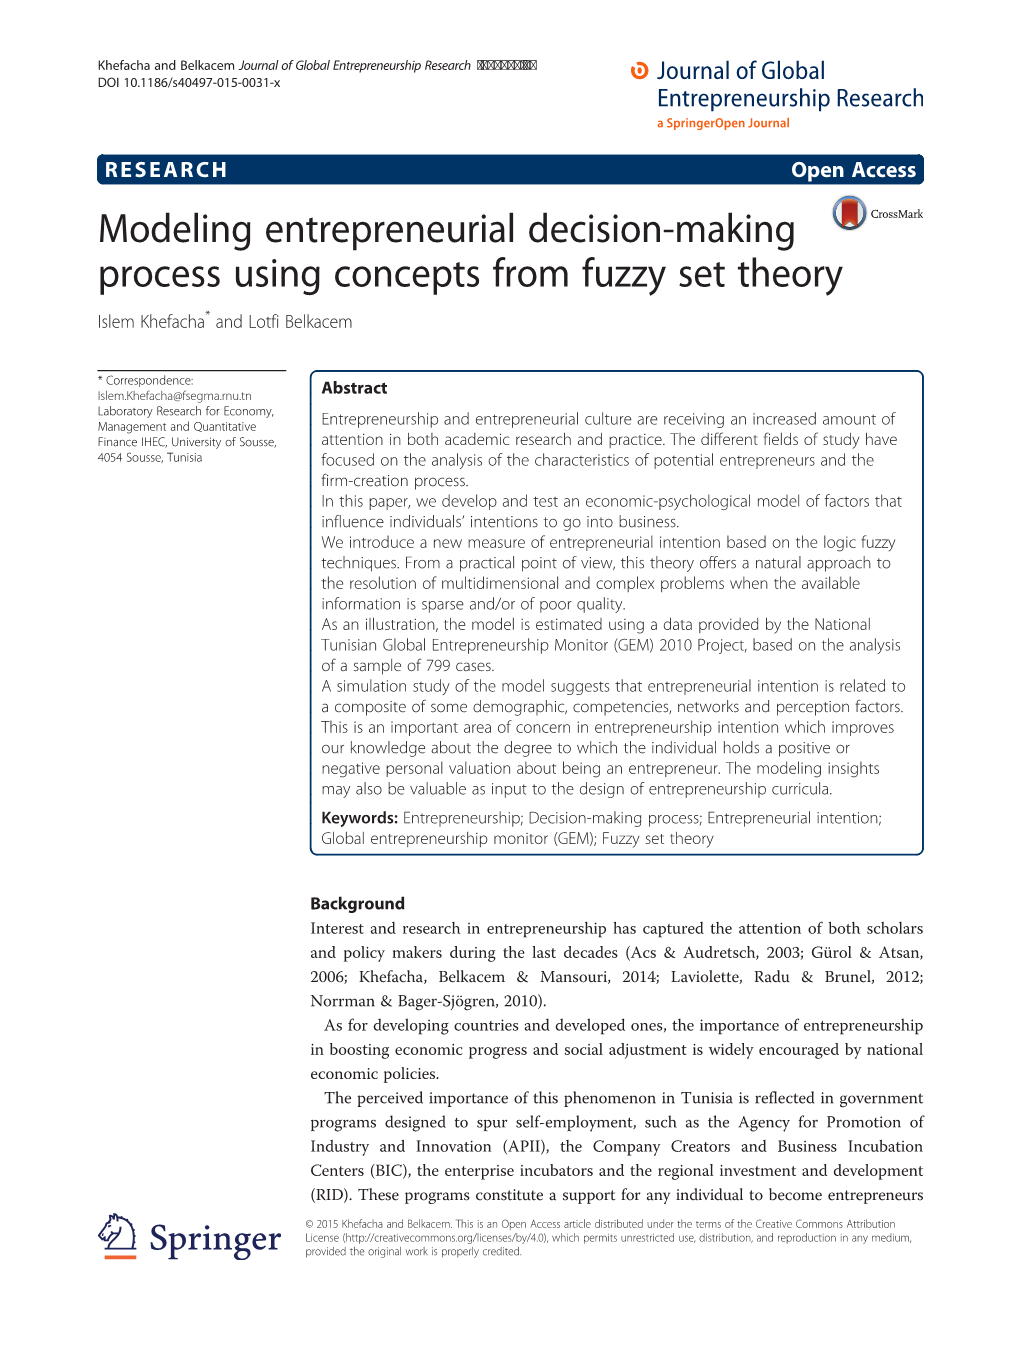 Modeling Entrepreneurial Decision-Making Process Using Concepts from Fuzzy Set Theory Islem Khefacha* and Lotfi Belkacem